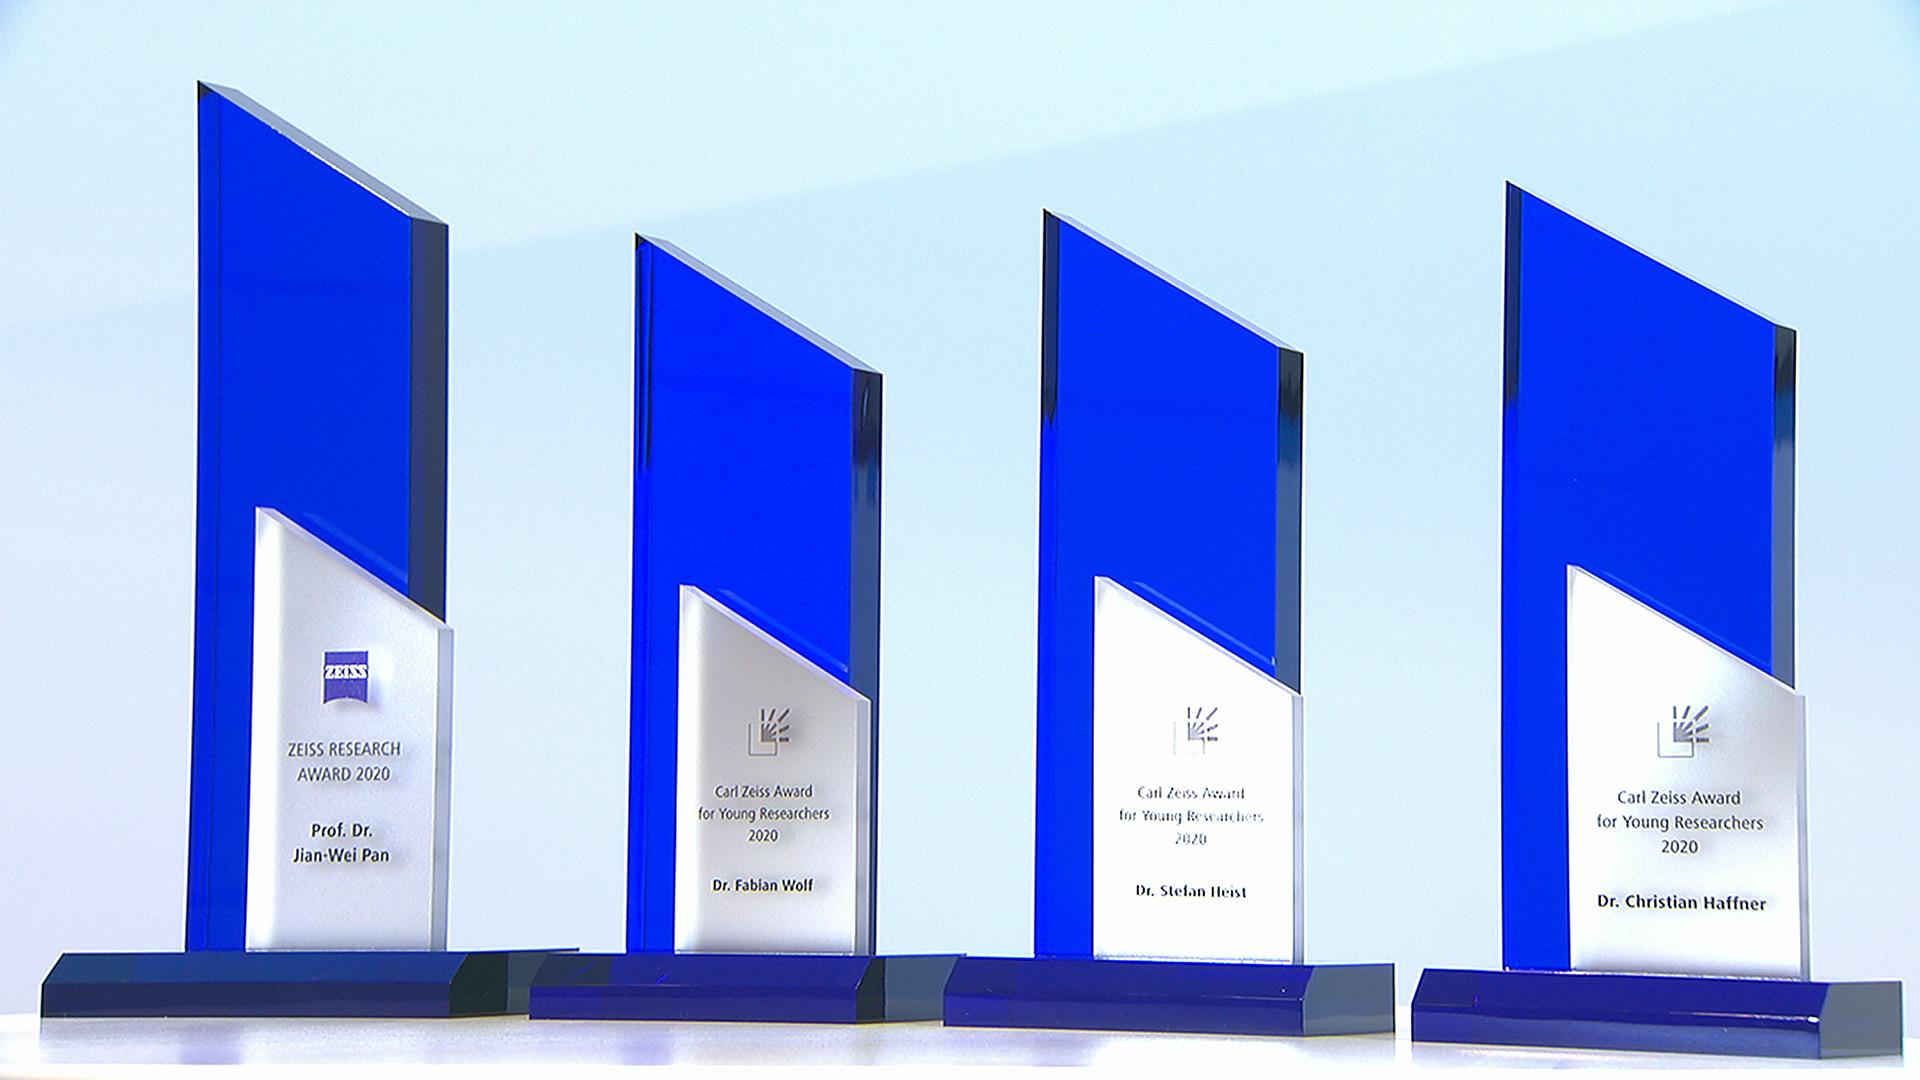 ZEISS Research Award and Carl Zeiss Award for Young Researchers